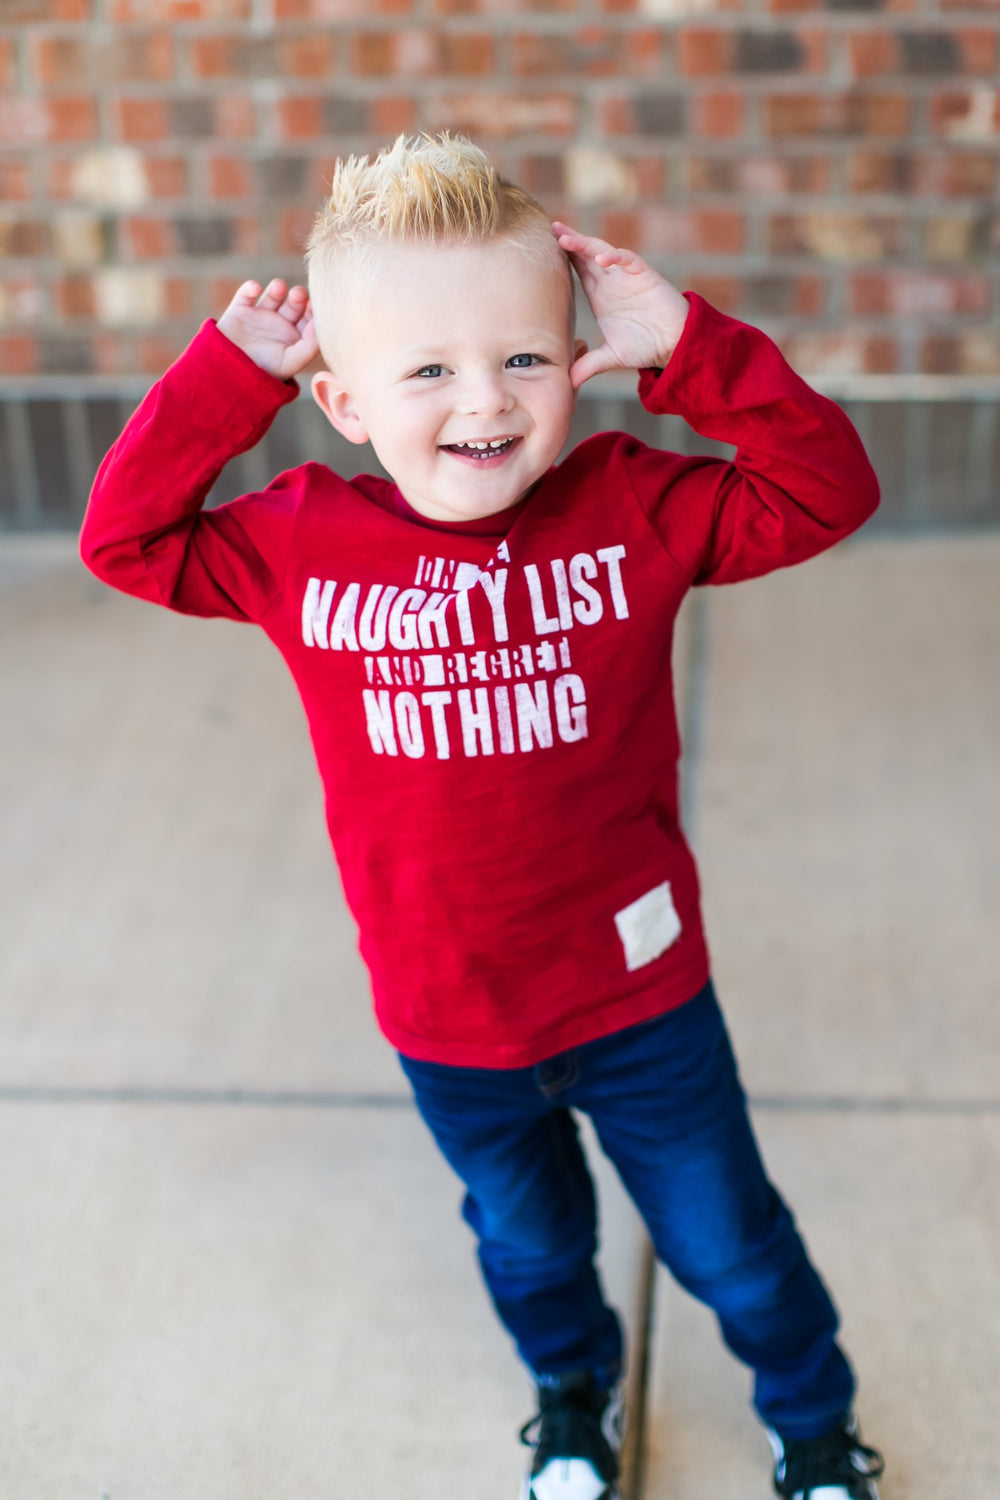 On the Naughty List and Regret nothing